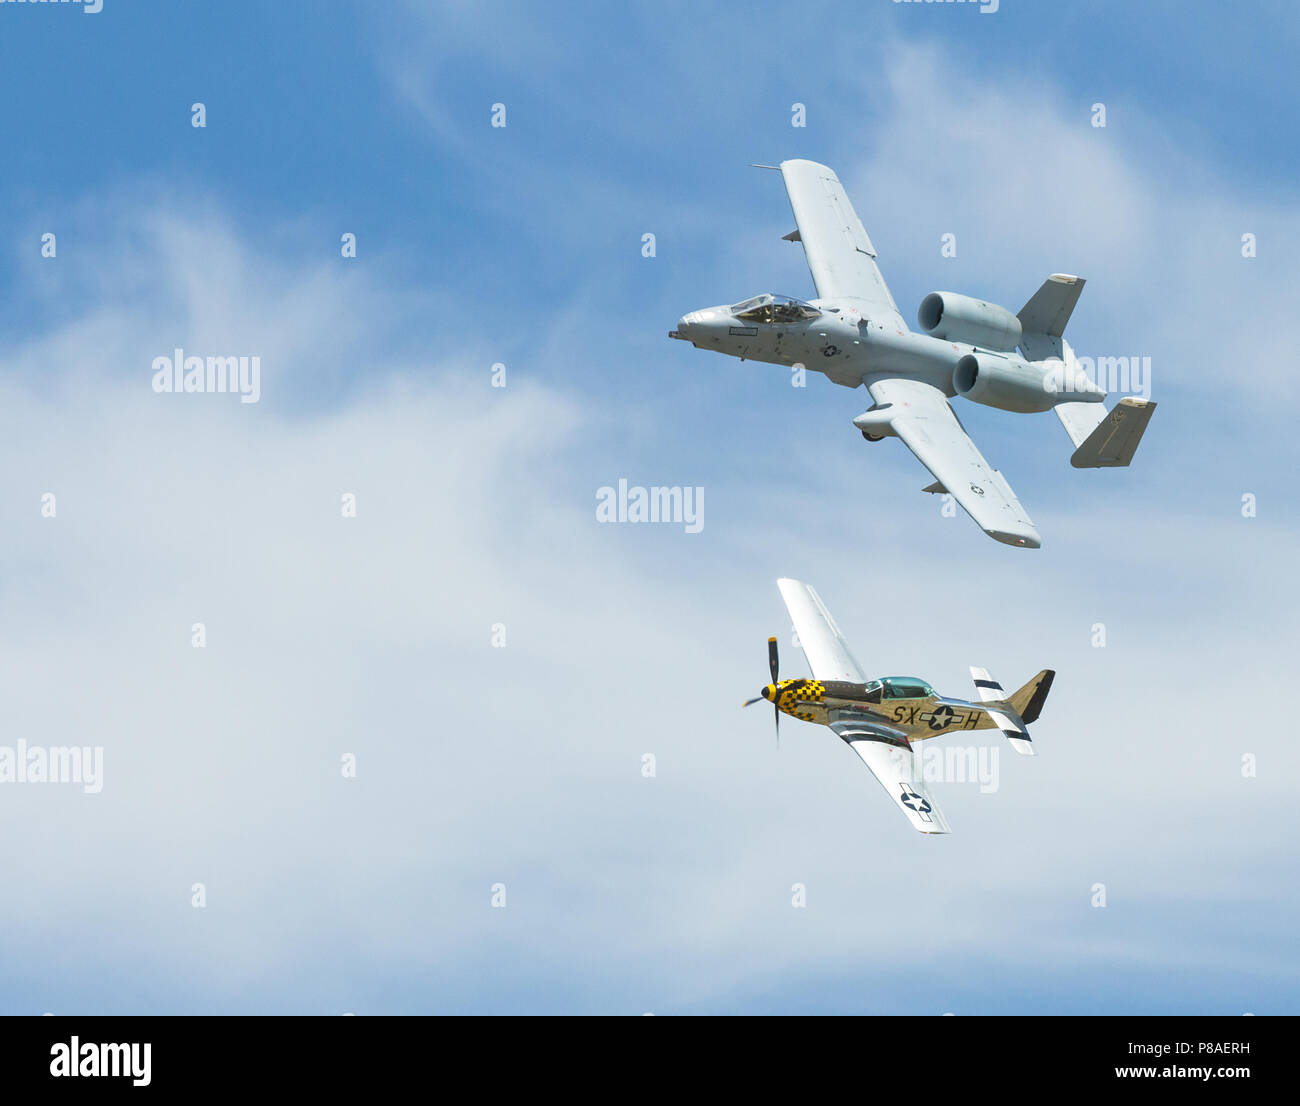 The Modern tank buster a A-10 warthog in a heritage flight with the WWII great the P-51 mustang both banked in flight Stock Photo